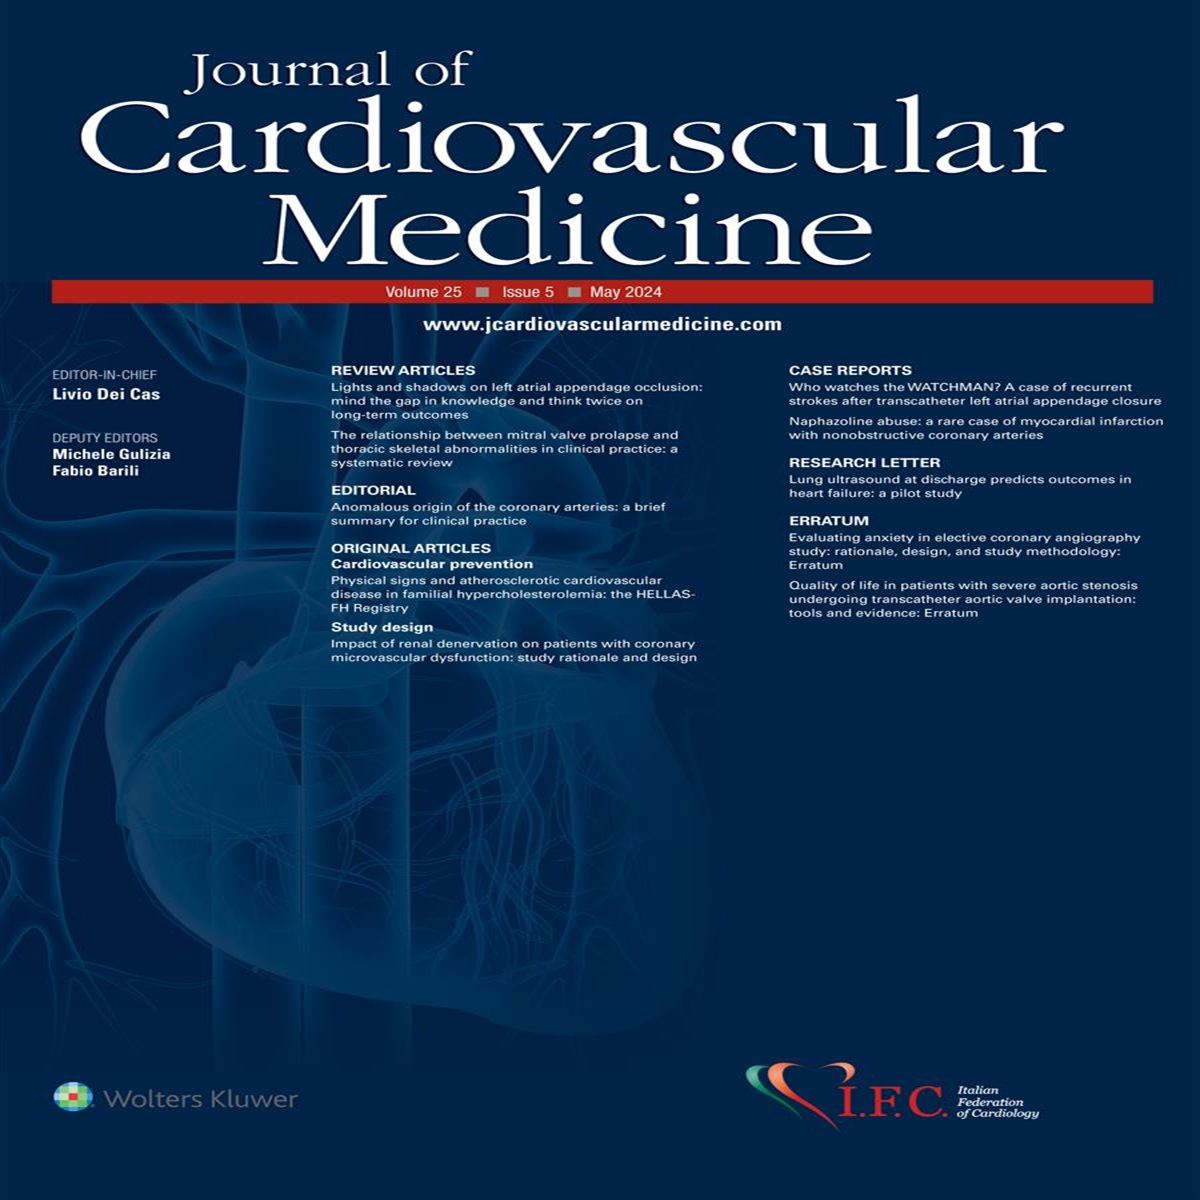 Evaluating anxiety in elective coronary angiography study: rationale, design, and study methodology: Erratum